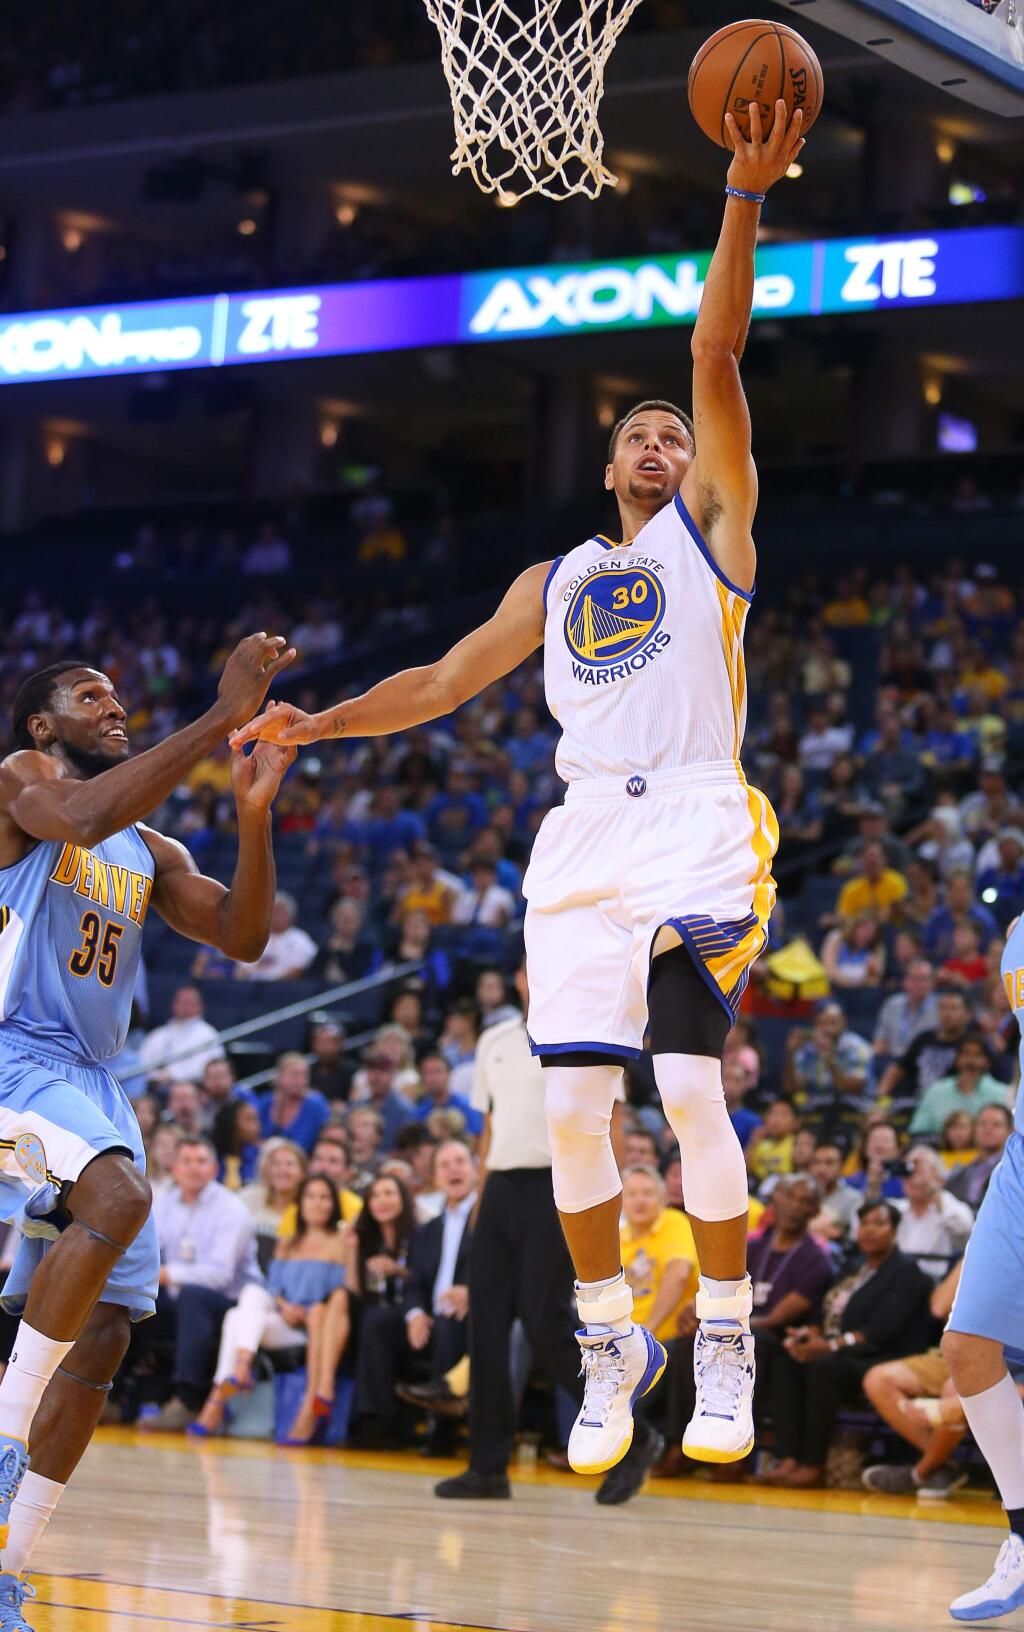 Warriors guard Stephen Curry lays the ball in against Nuggets forward Kenneth Faried during their preseason game in Oakland on Tuesday, October 13, 2015. (Christopher Chung/ The Press Democrat)